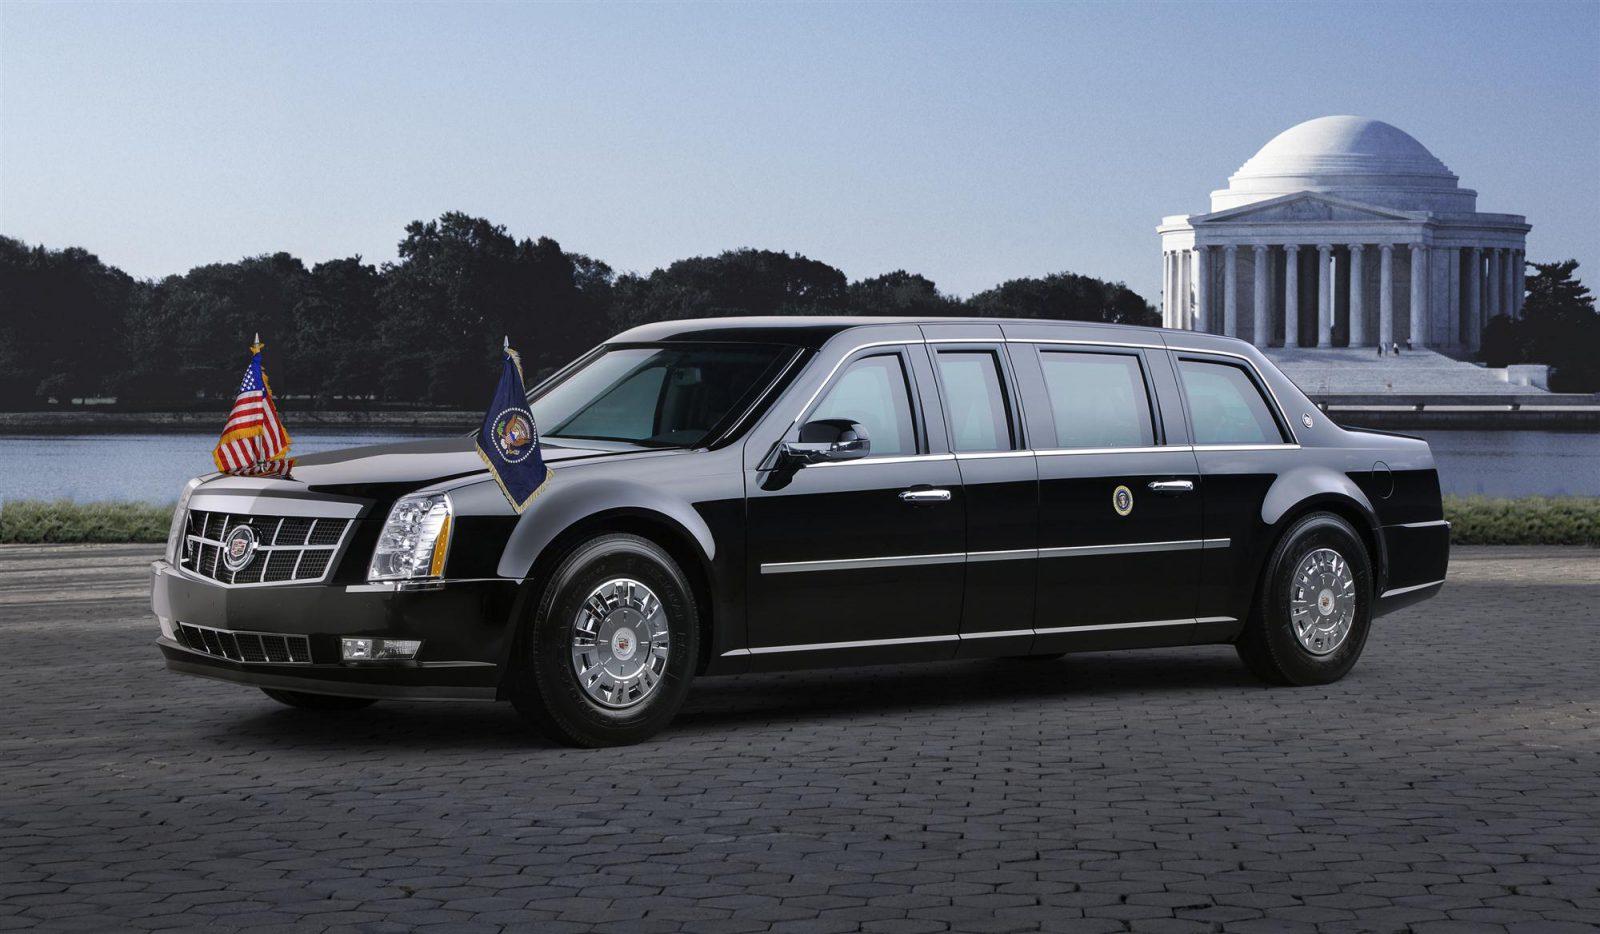 Donald Trump car collection- what you need to know about it